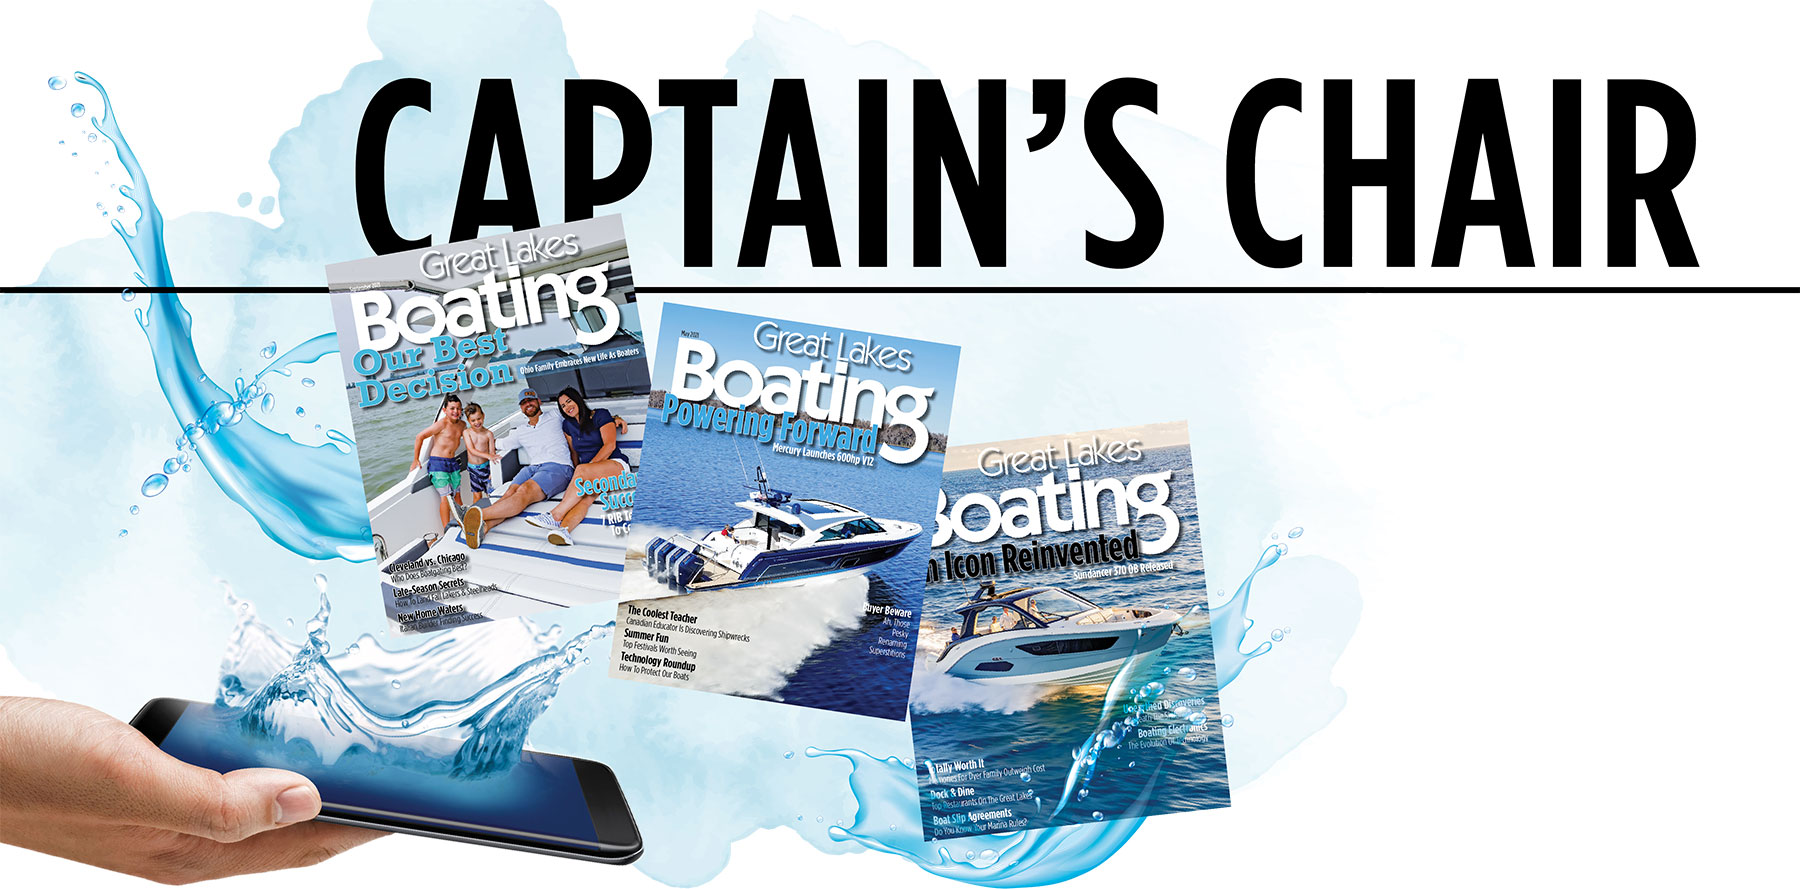 Captain's Chair title with hand holding phone and magazine covers